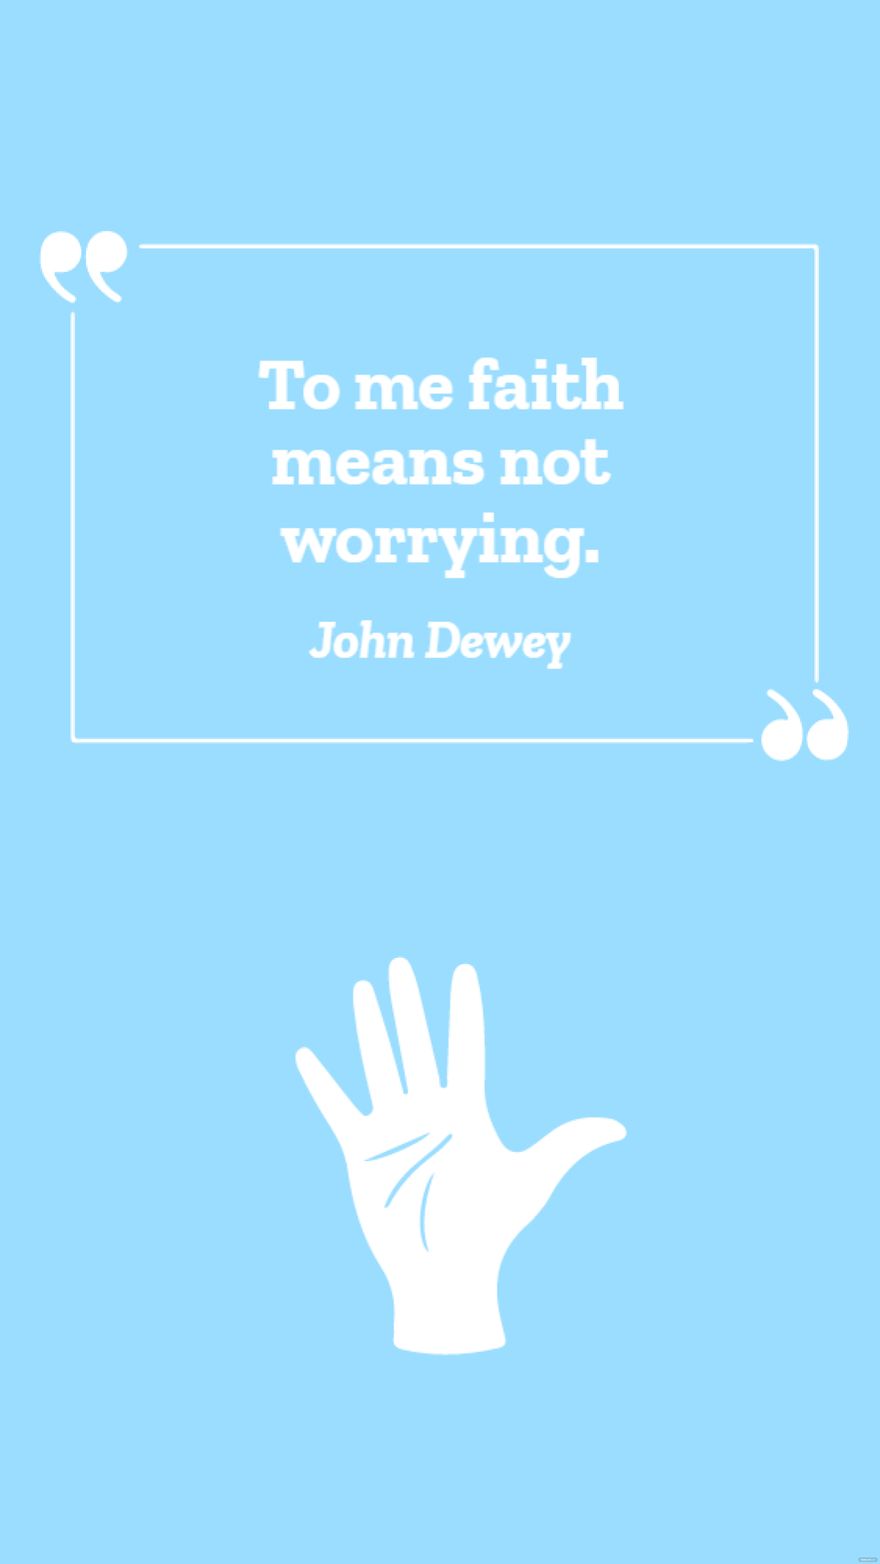 Free John Dewey - To me faith means not worrying. in JPG